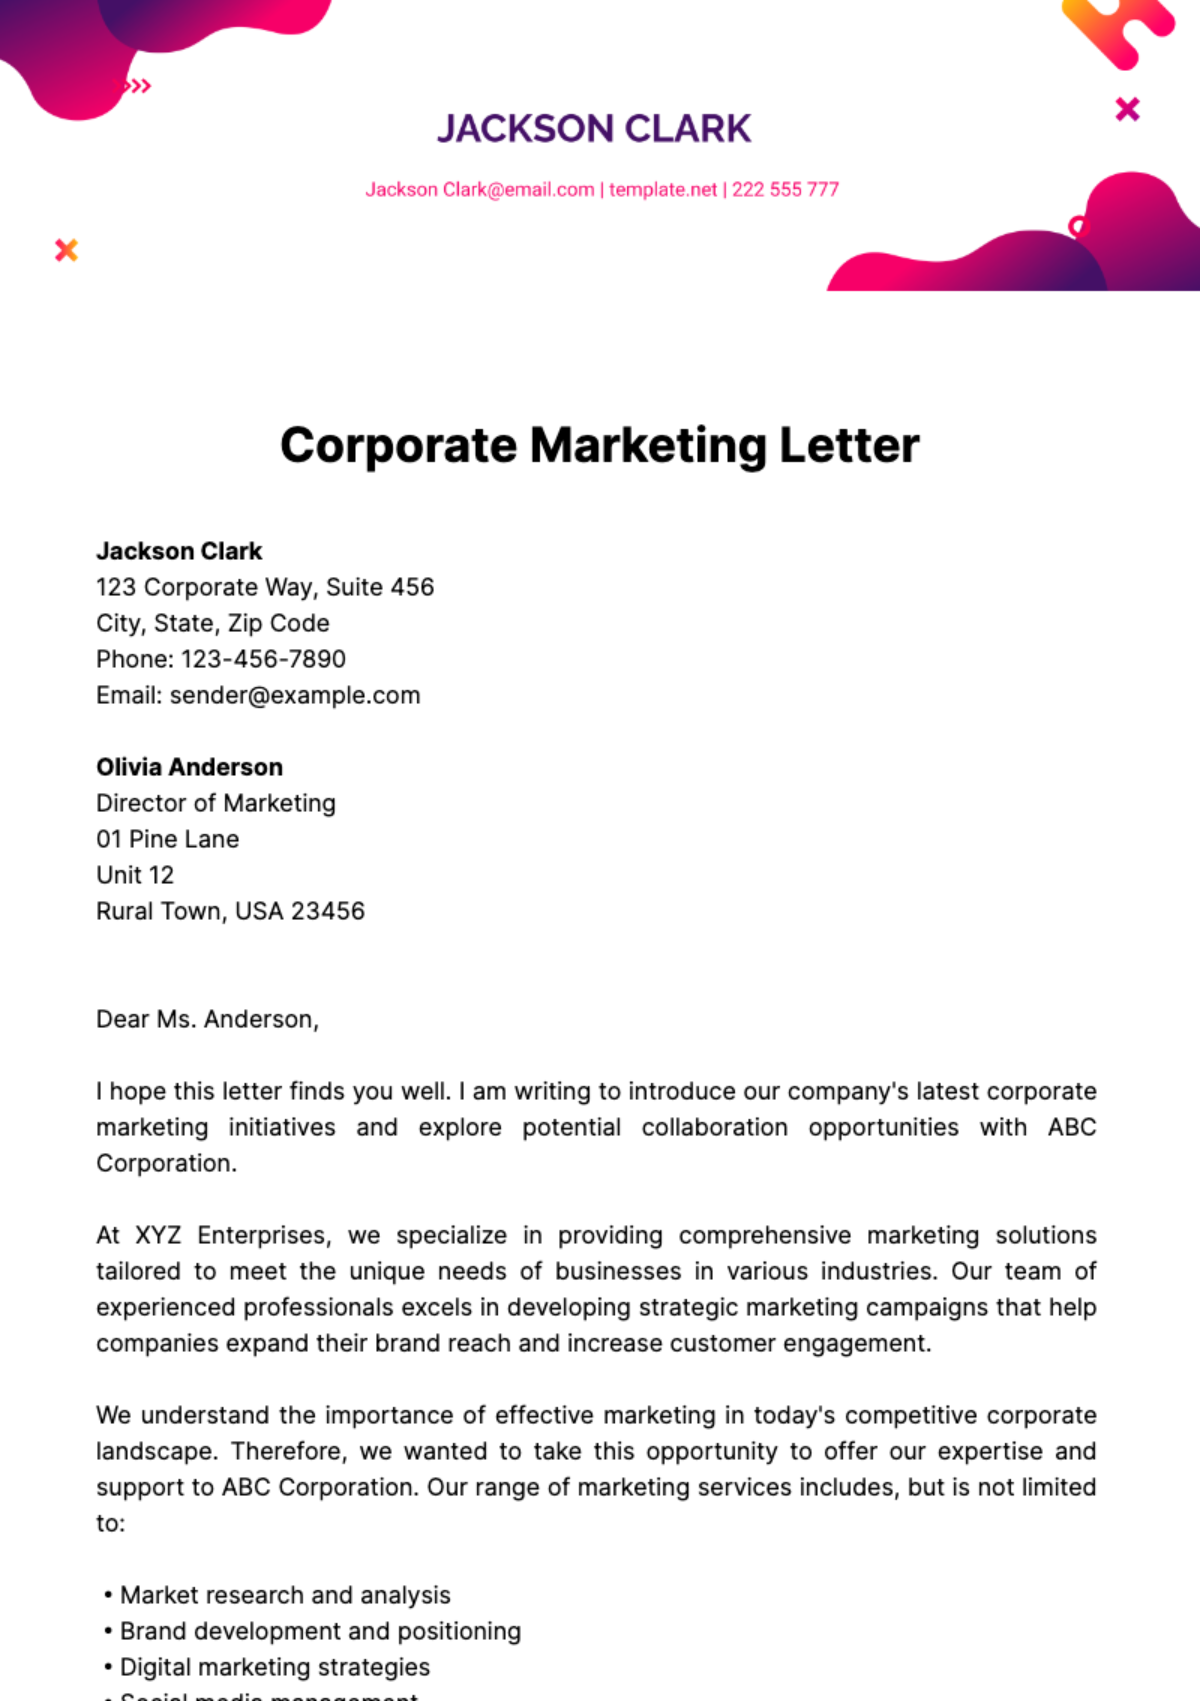 Free Corporate Marketing Letter Template